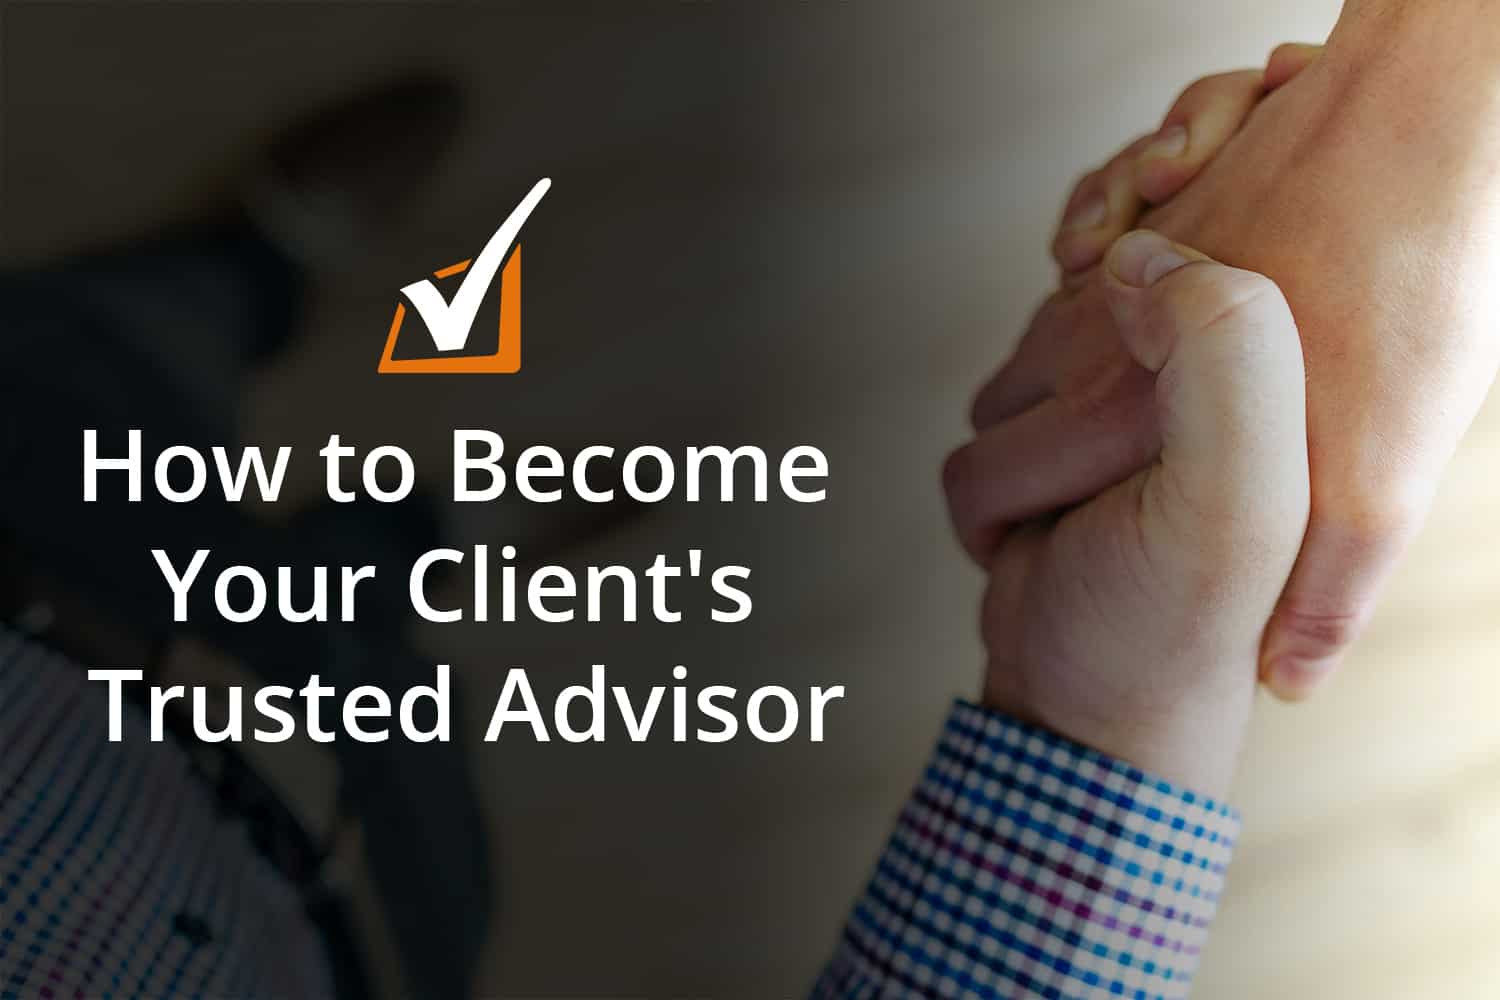 How to Become Your Client's Trusted Advisor